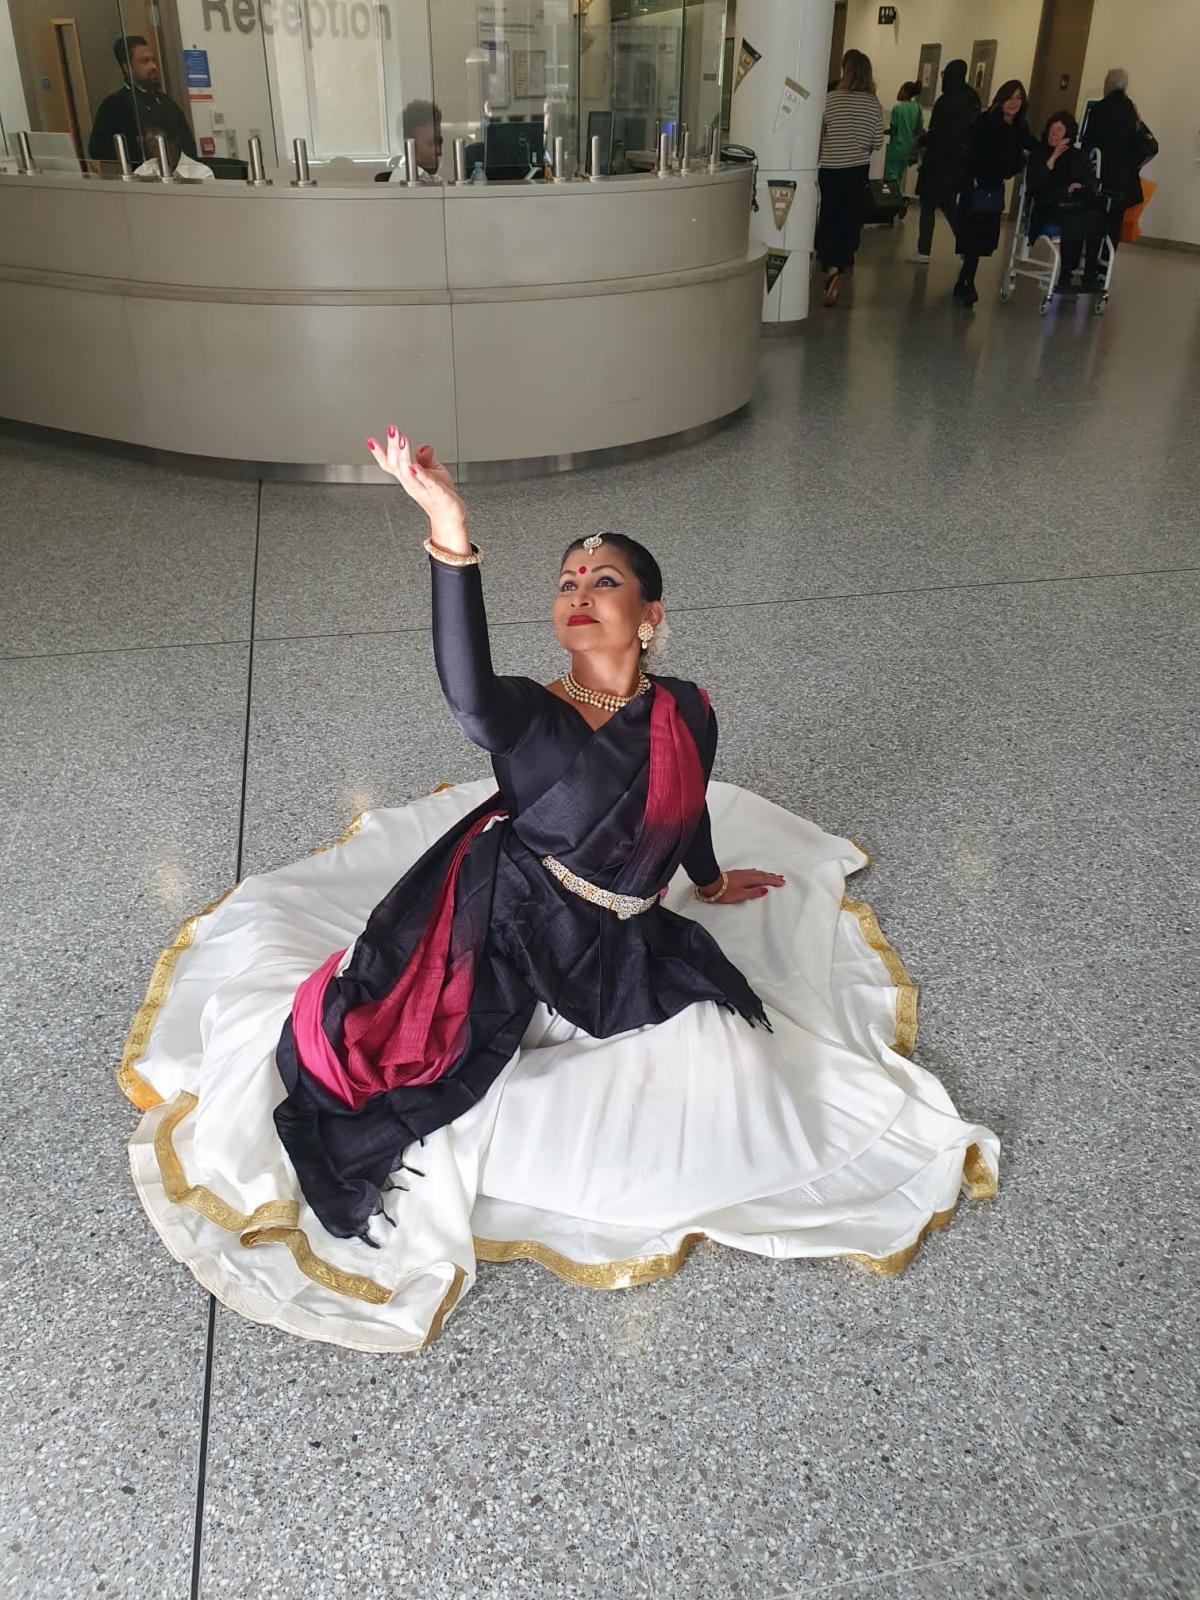 A Kathak dancer sitting on the floor striking a pose. She si dressed in white skirt, black top and a black and red veil, with her hair tied back in a bun.